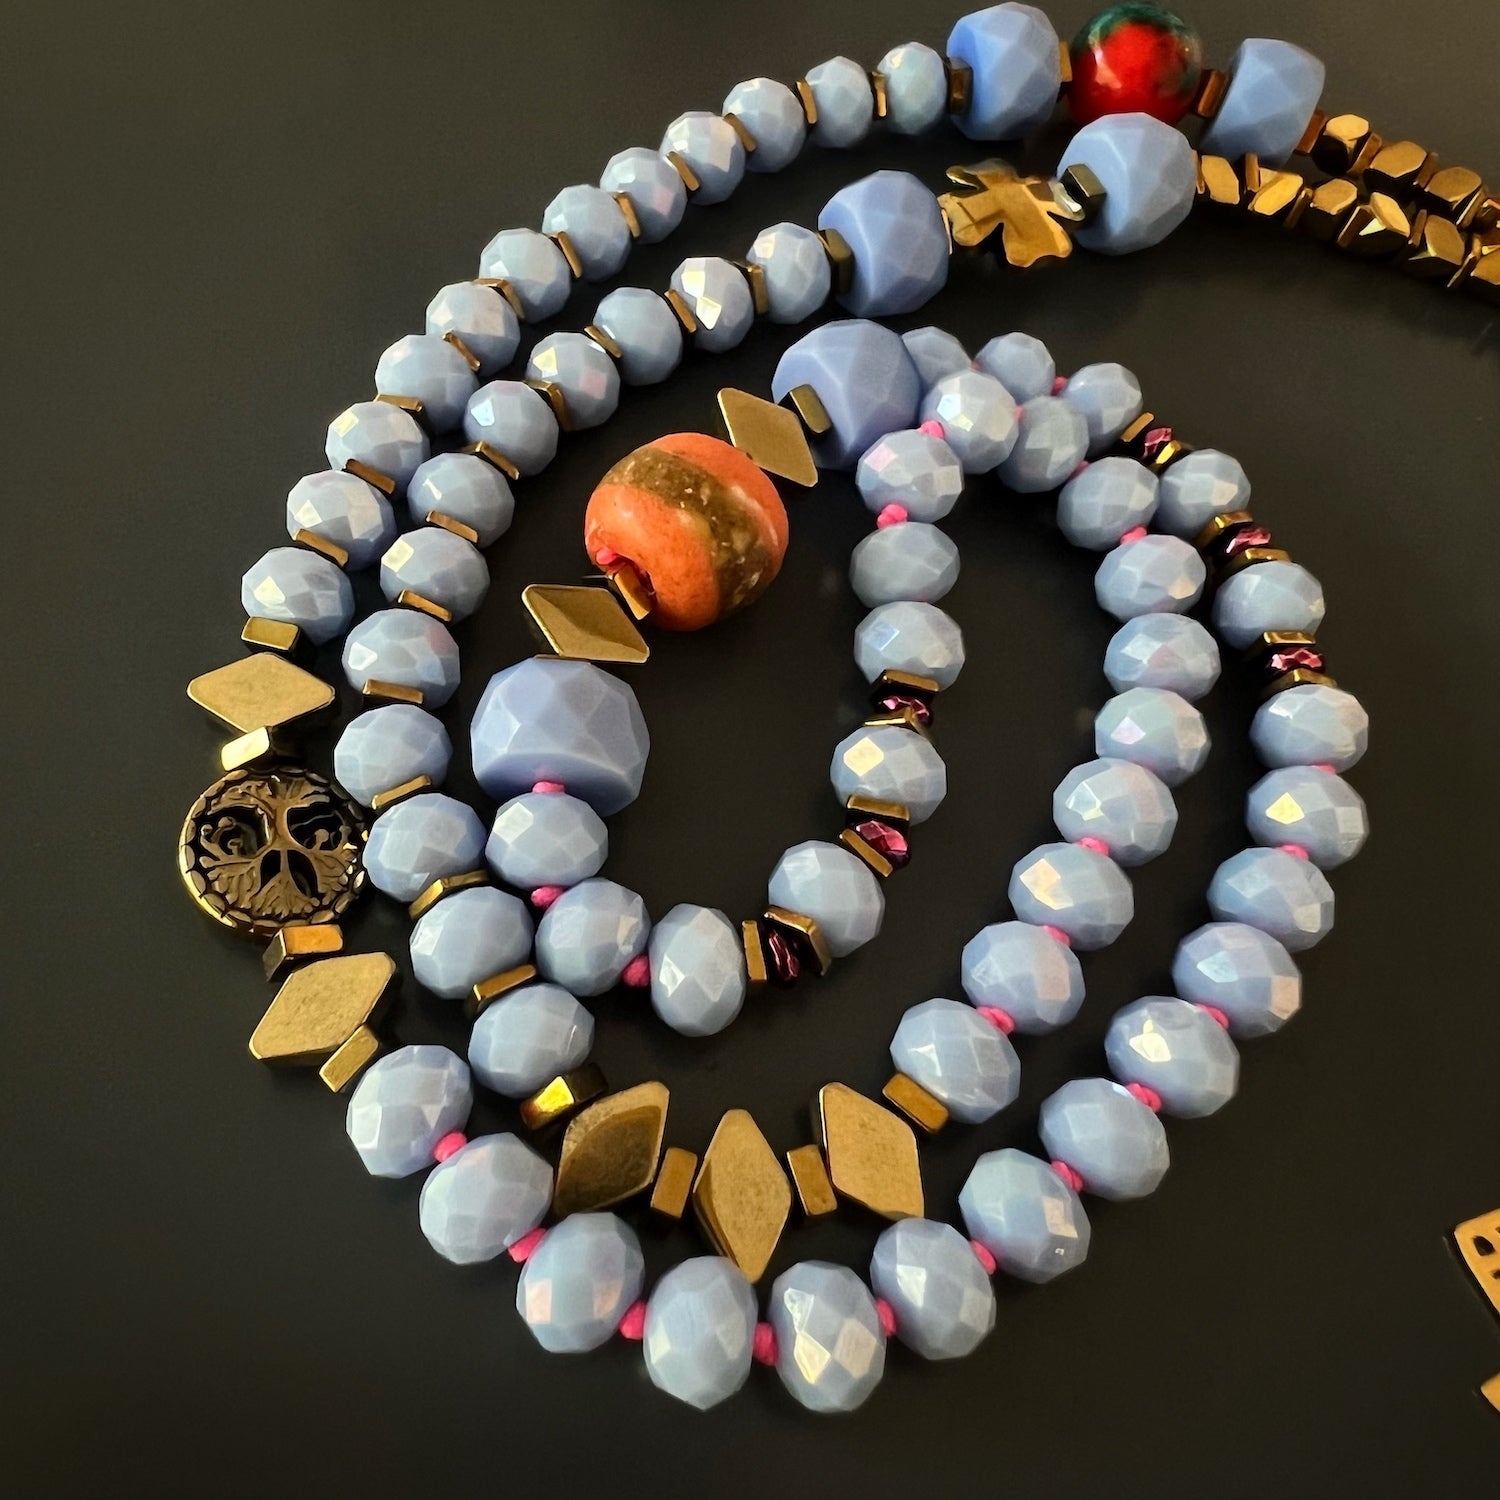 Blue Magic Gold Elephant Necklace, a handmade and meaningful accessory with a combination of blue crystal beads, gold-colored hematite stone beads, and the elephant pendant.